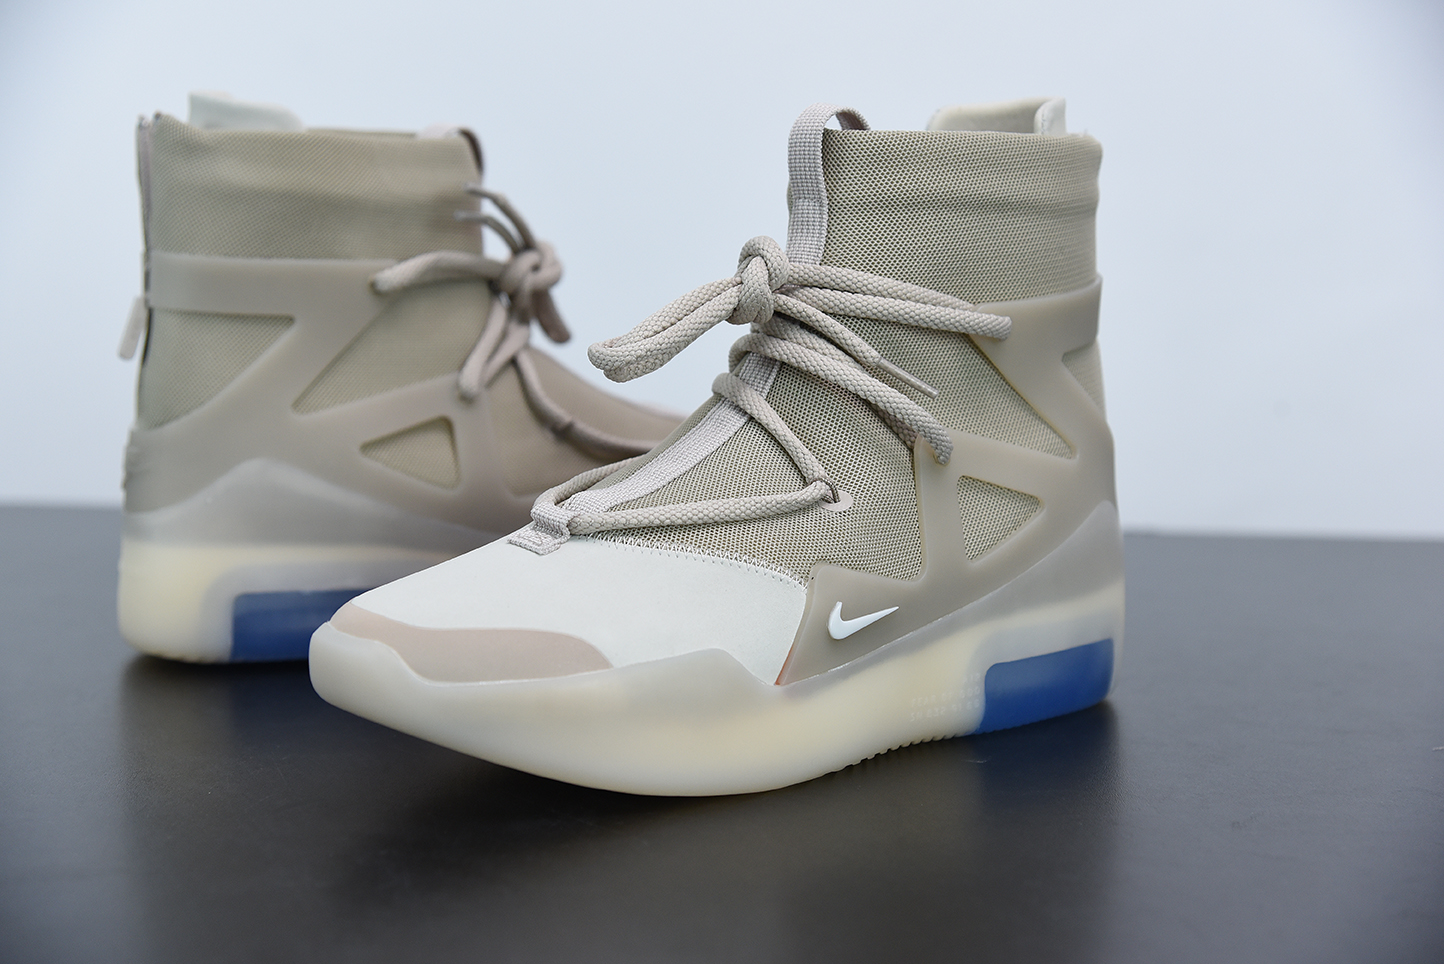 Nike Air Fear of God 1 “Oatmeal” For Sale – The Sole Line